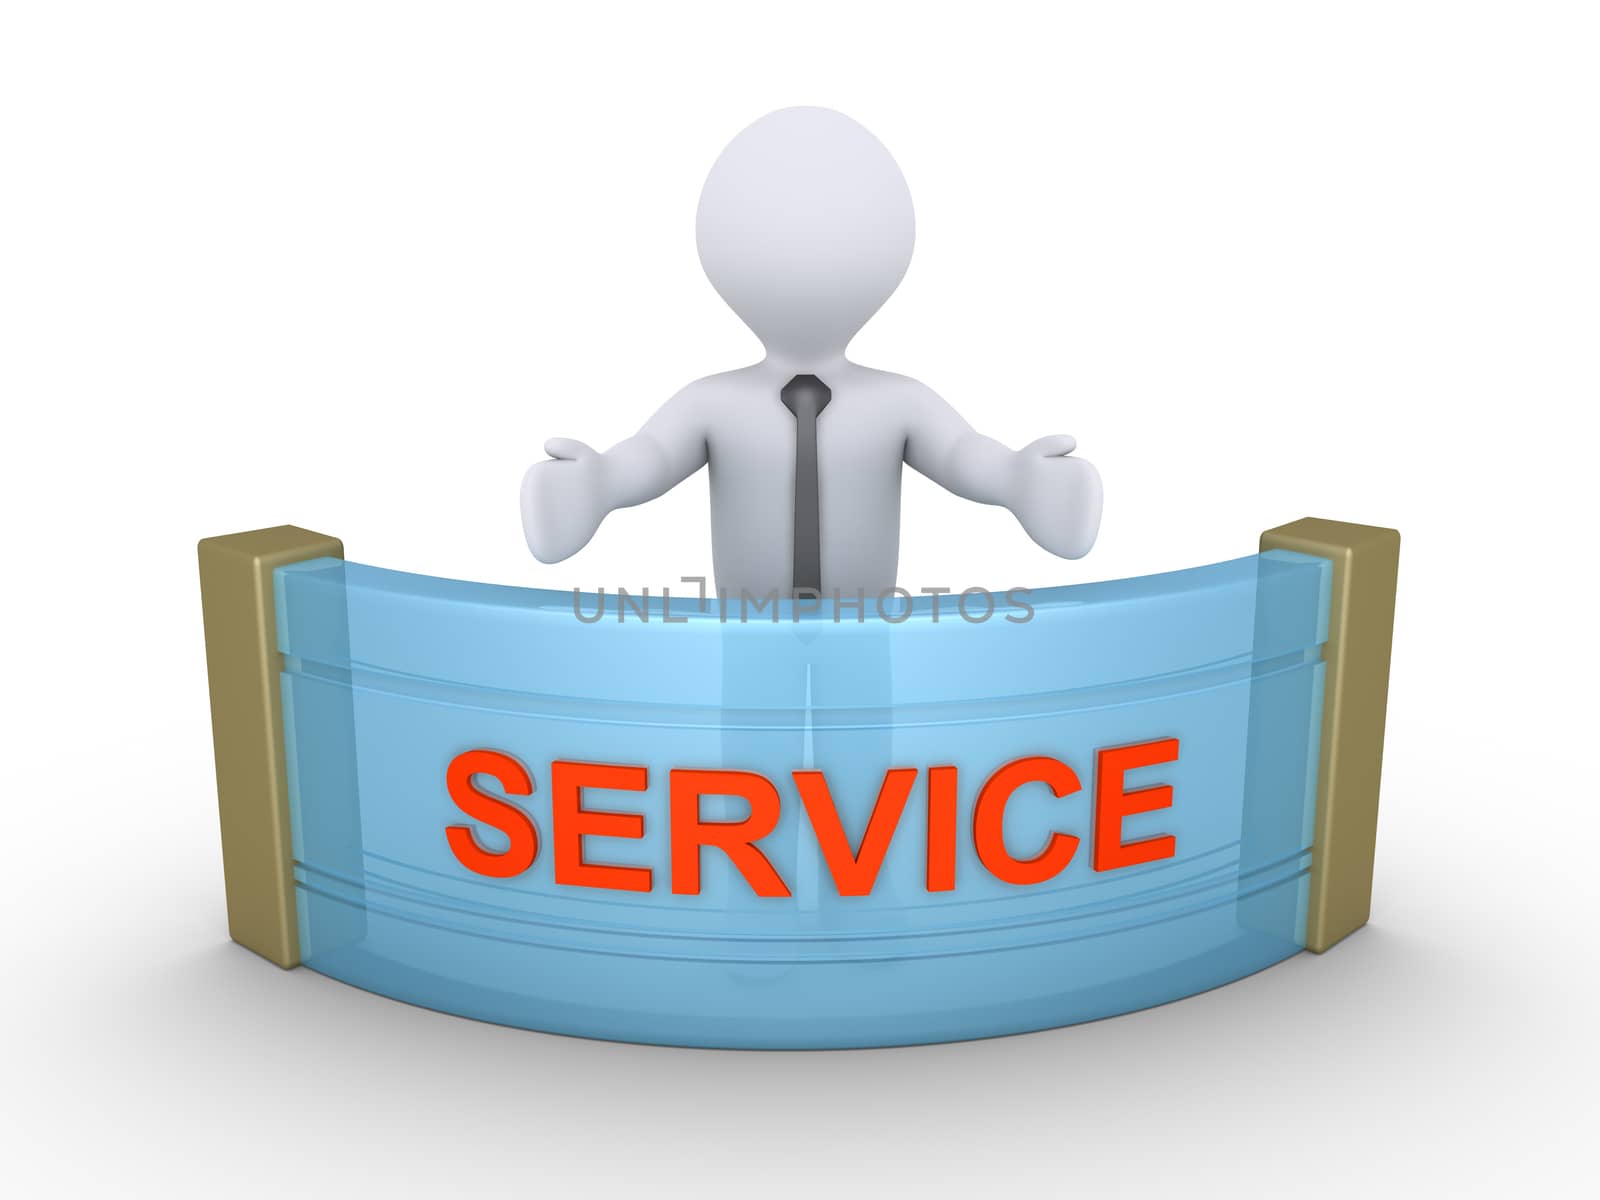 Businessman is providing service by 6kor3dos